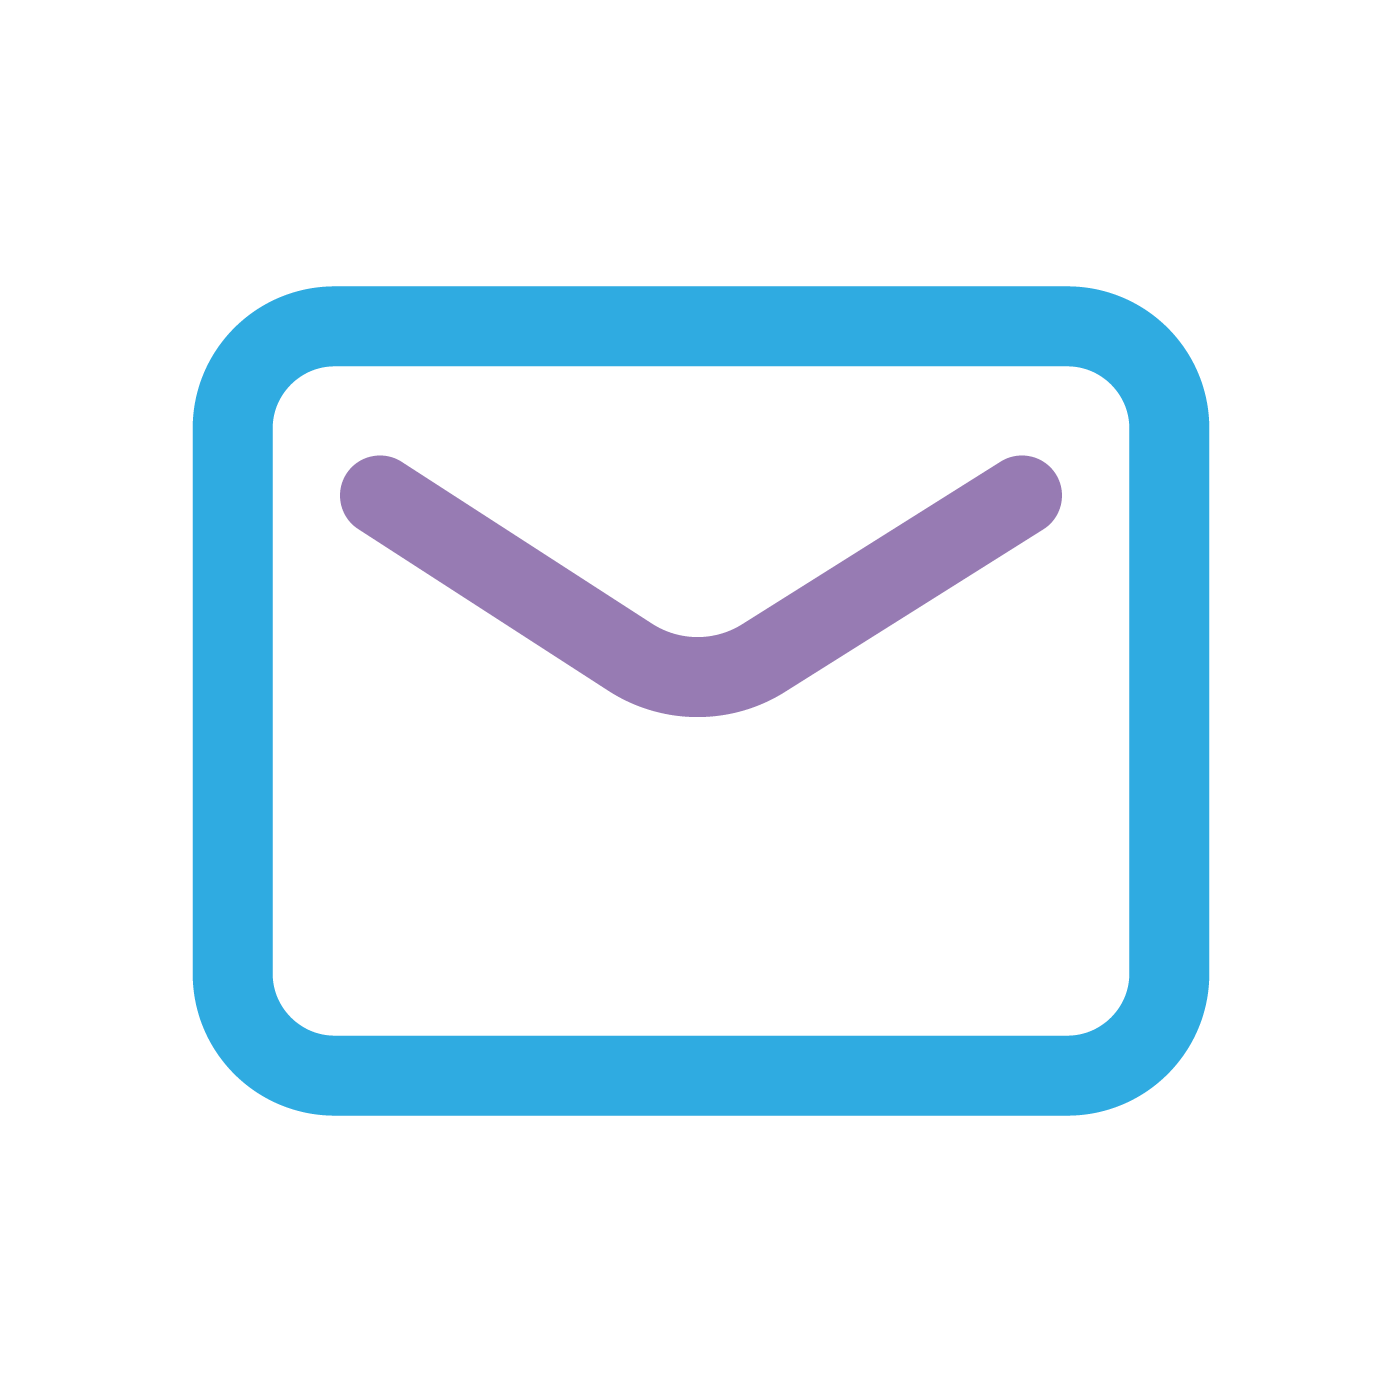 An email icon